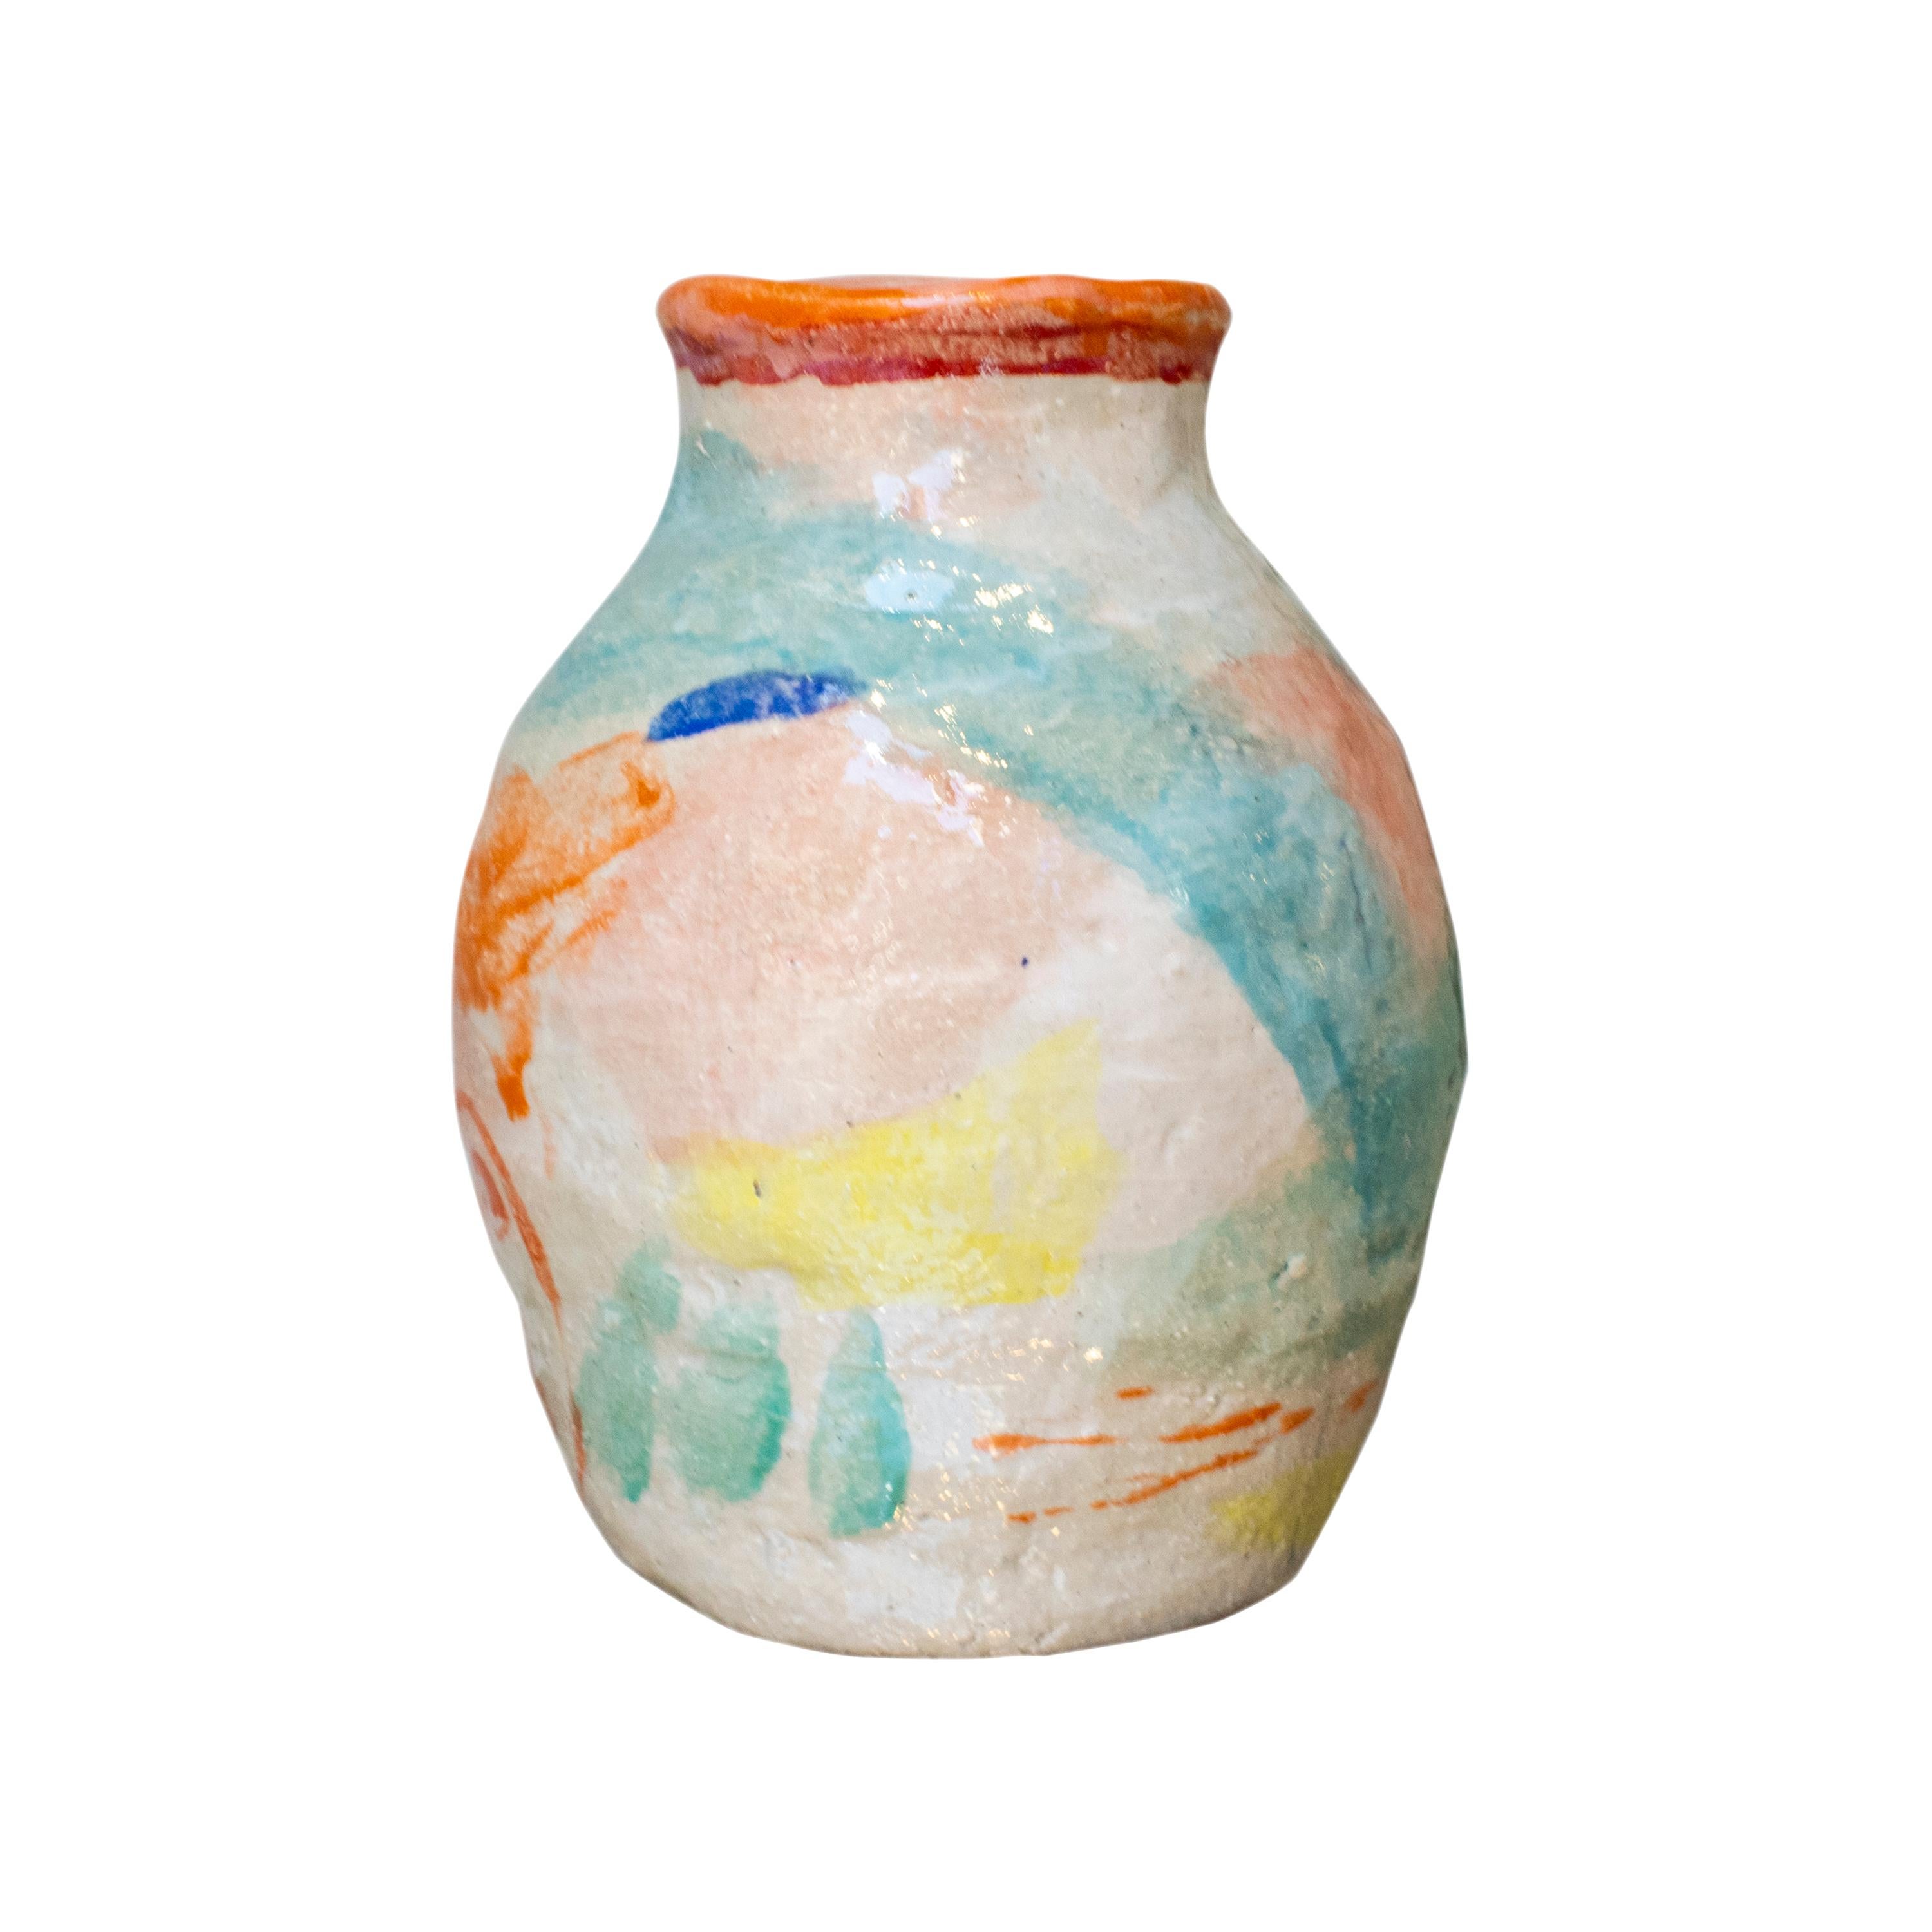 Handcrafted and painted modern vase designed by Spanish artist Ana Laso.

ANA LASO BAEZA is an artist from Madrid who develops her activity fundamentally as a painter and, for a few years, also as a ceramicist. She trained pictorially at the Prado